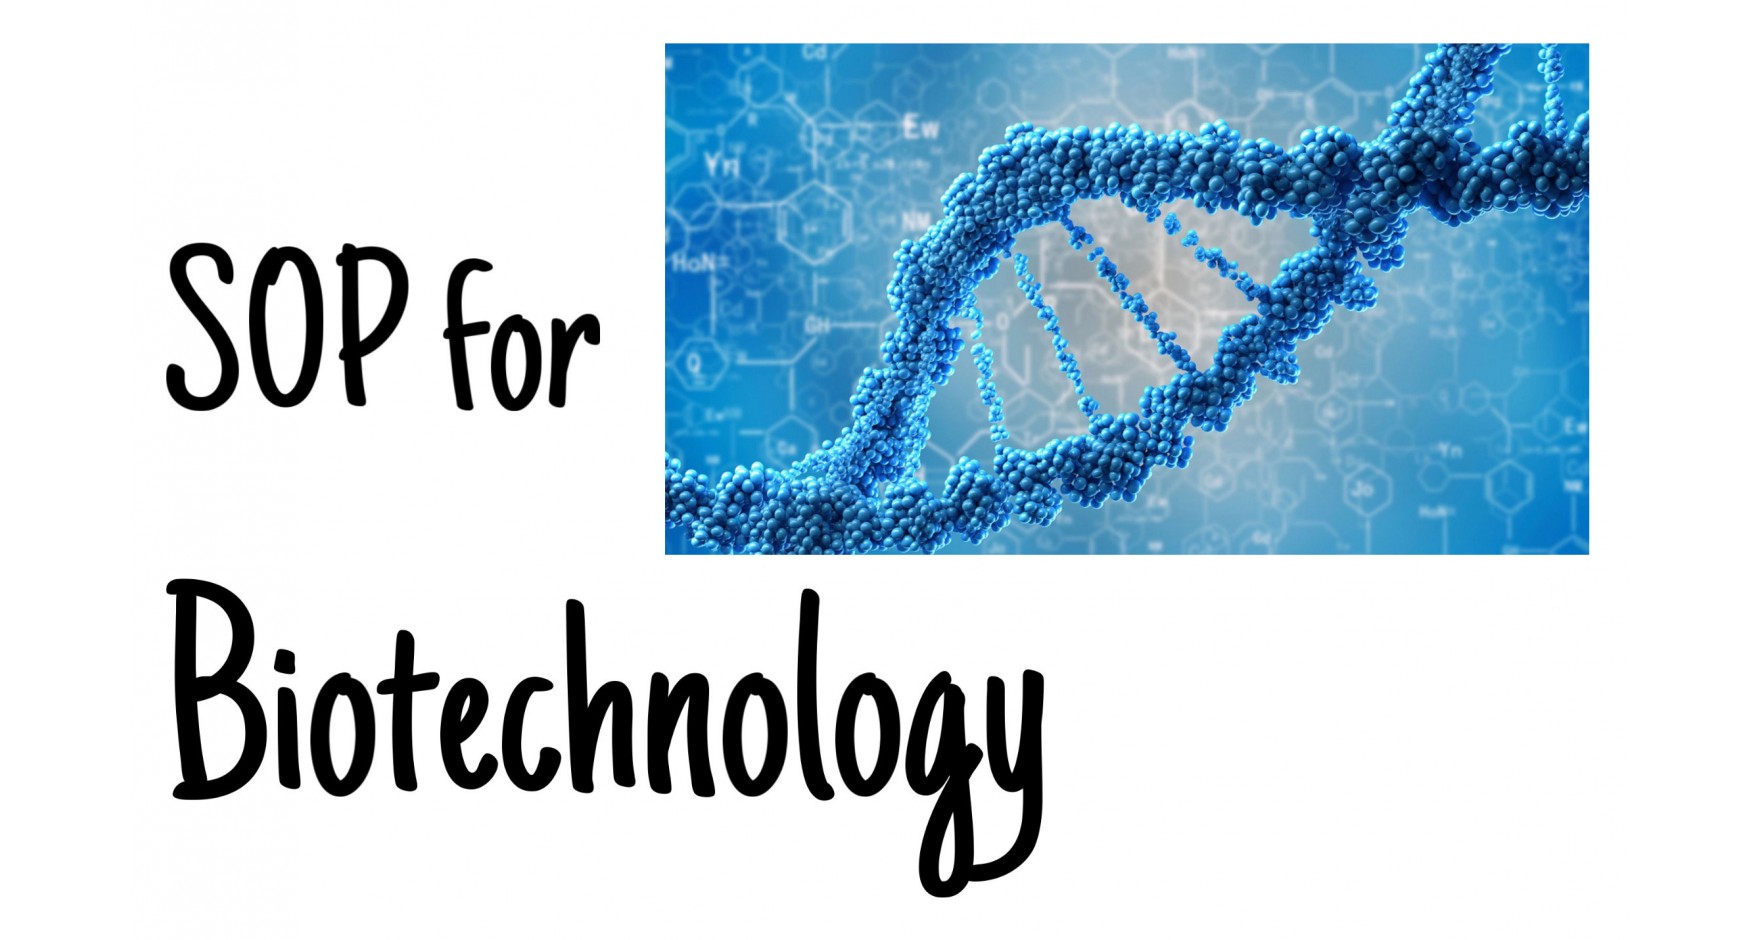 How to write SOP for Bio Technology?